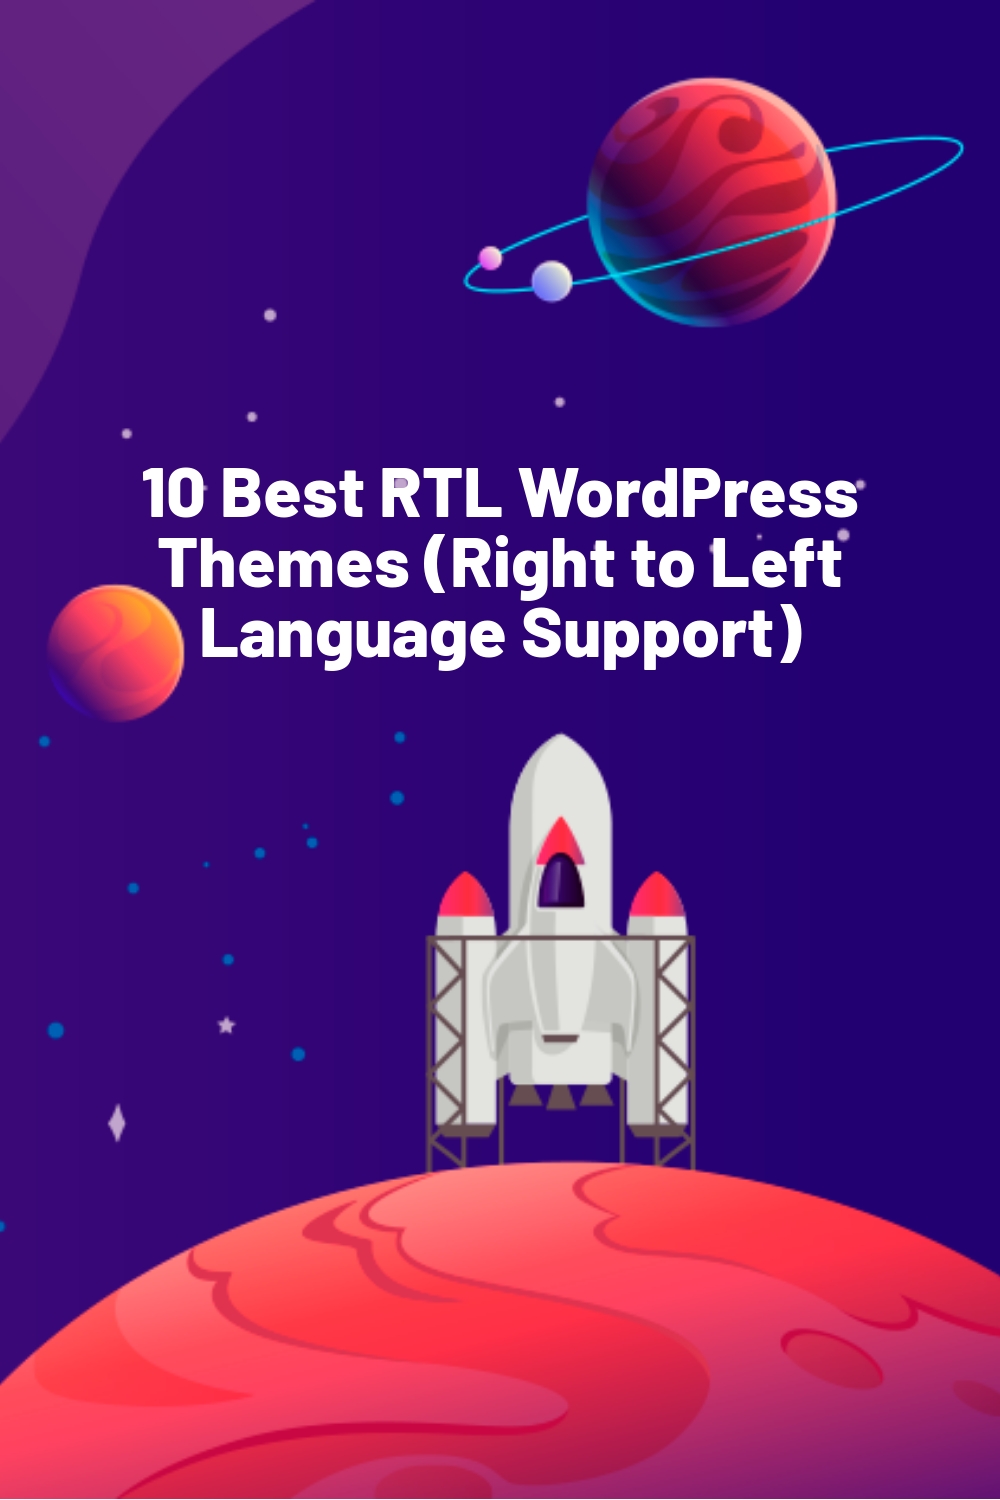 10 Best RTL WordPress Themes (Right to Left Language Support)